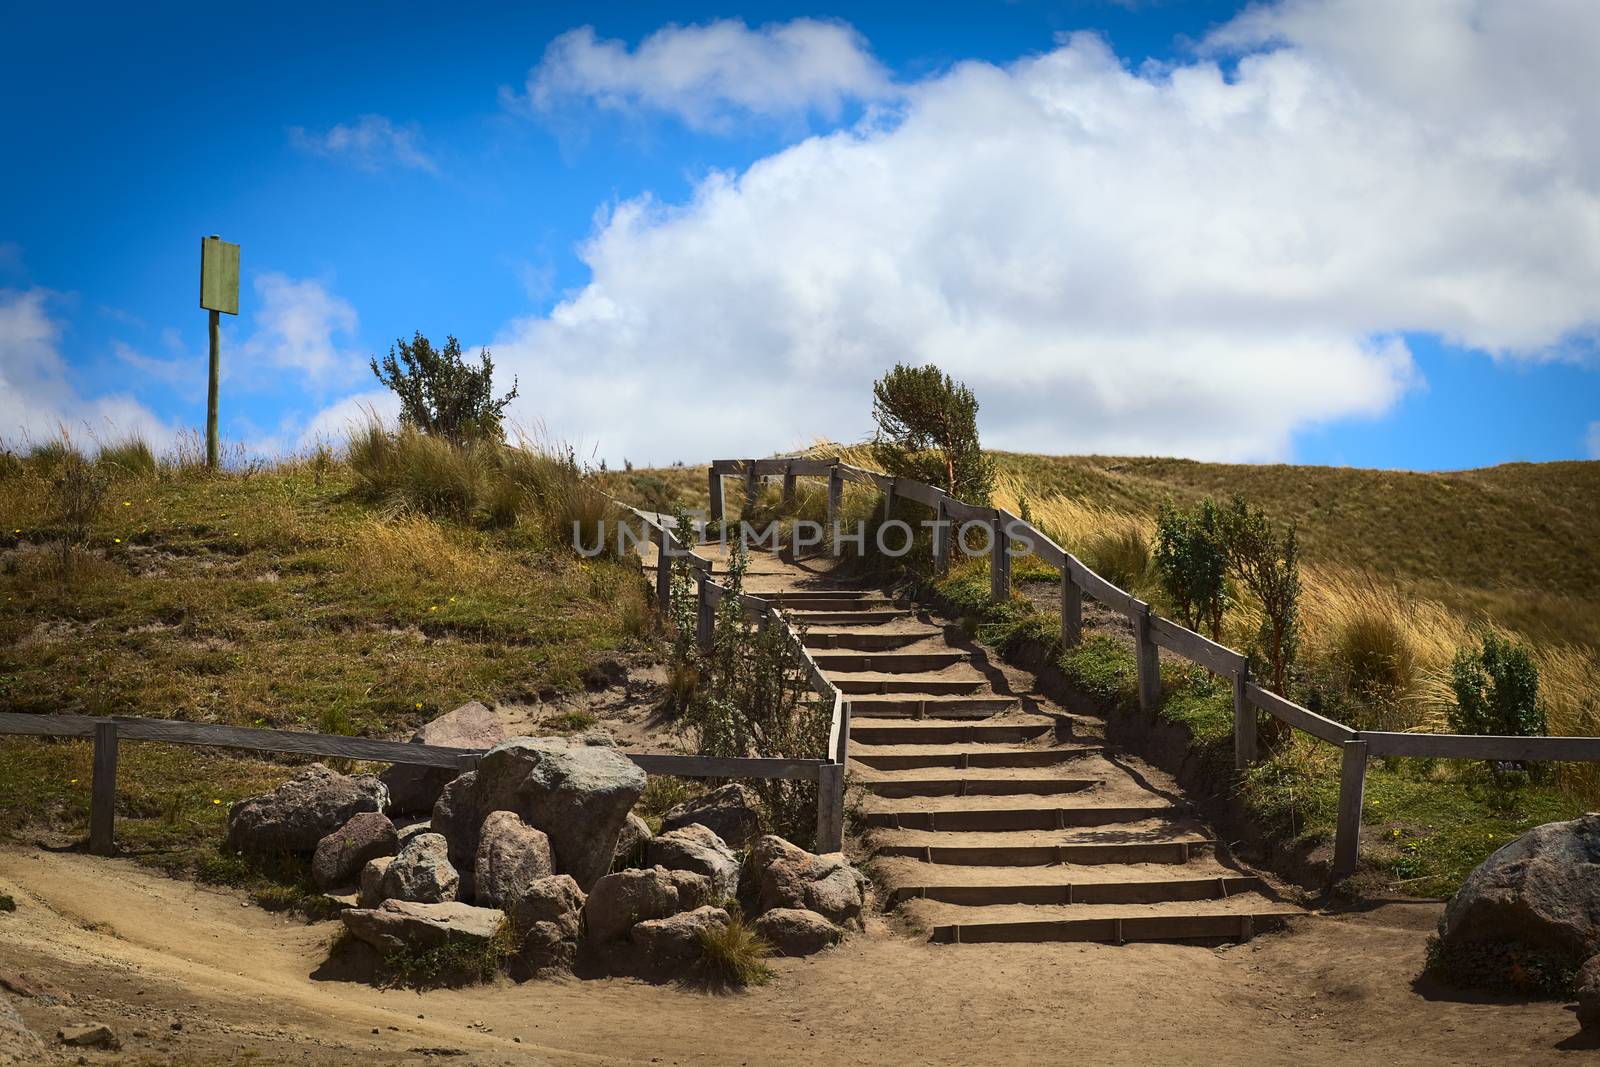 Stairs made of wood and soil leading uphill with paramo vegetation on the side on a sunny day